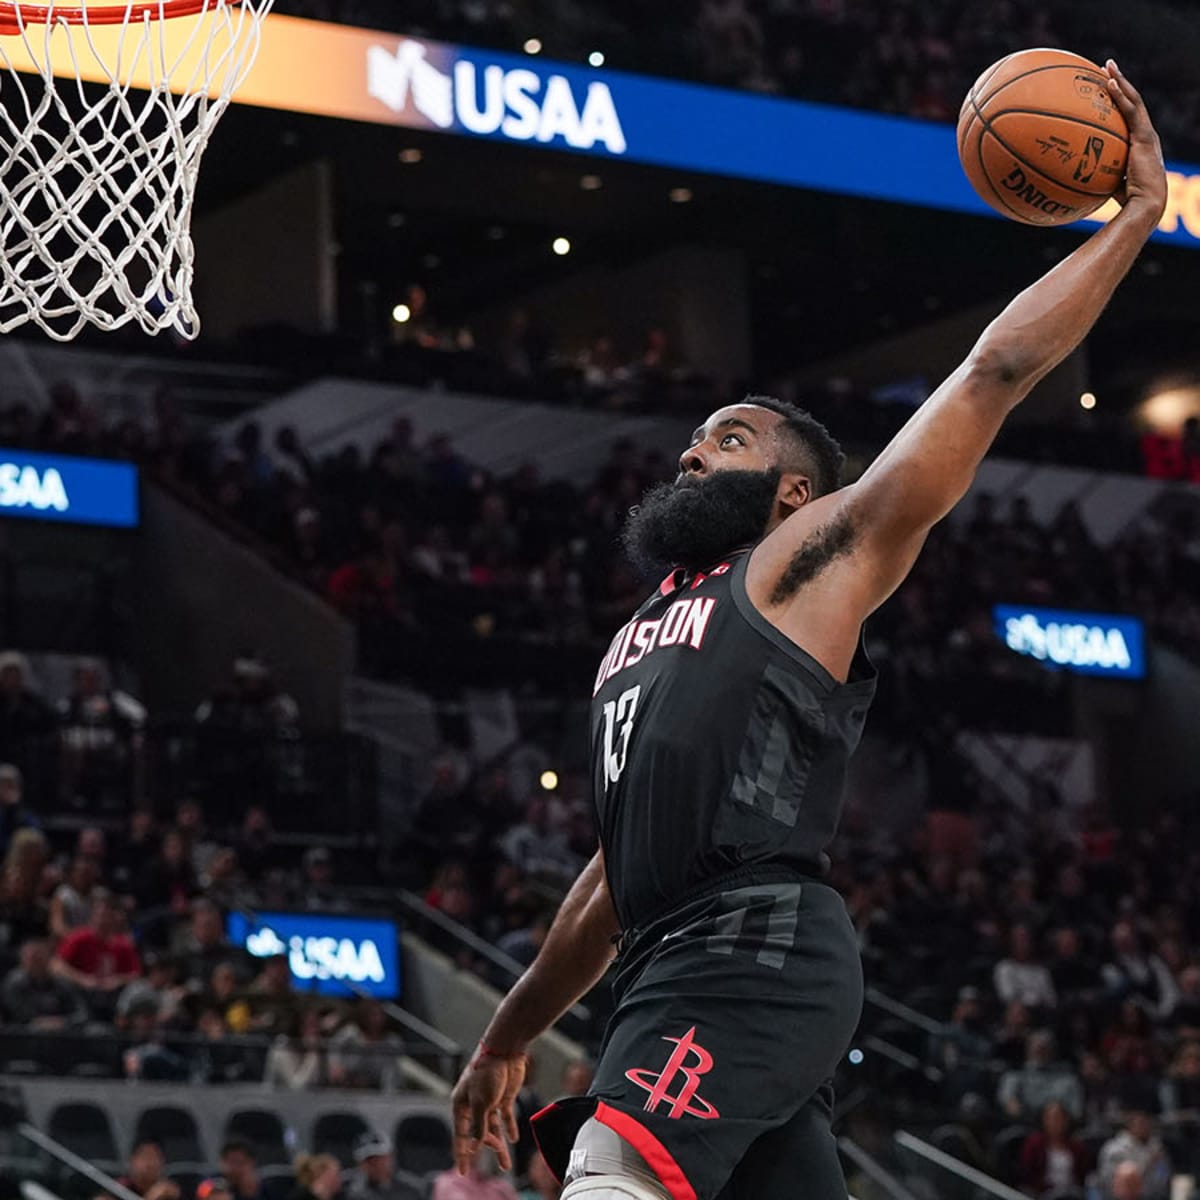 James Harden dunk: How NBA should handle situation - Sports